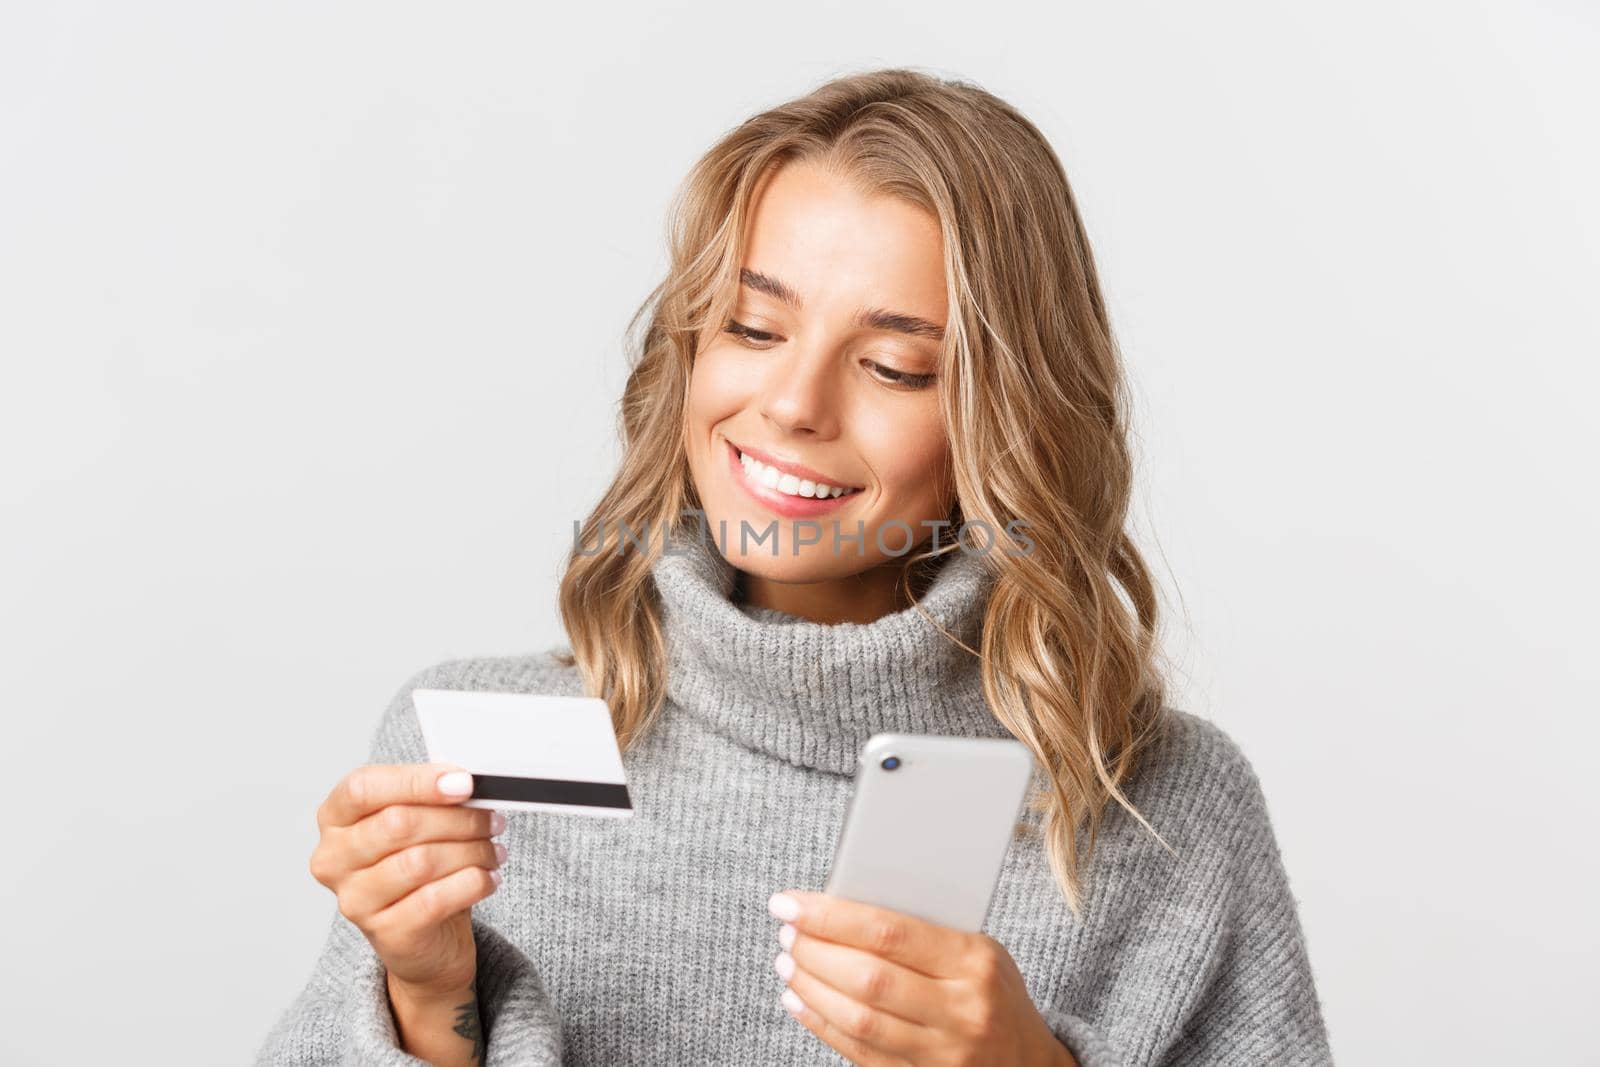 Close-up of blond woman in grey sweater looking at credit card, holding mobile phone while shopping online, standing over white background.